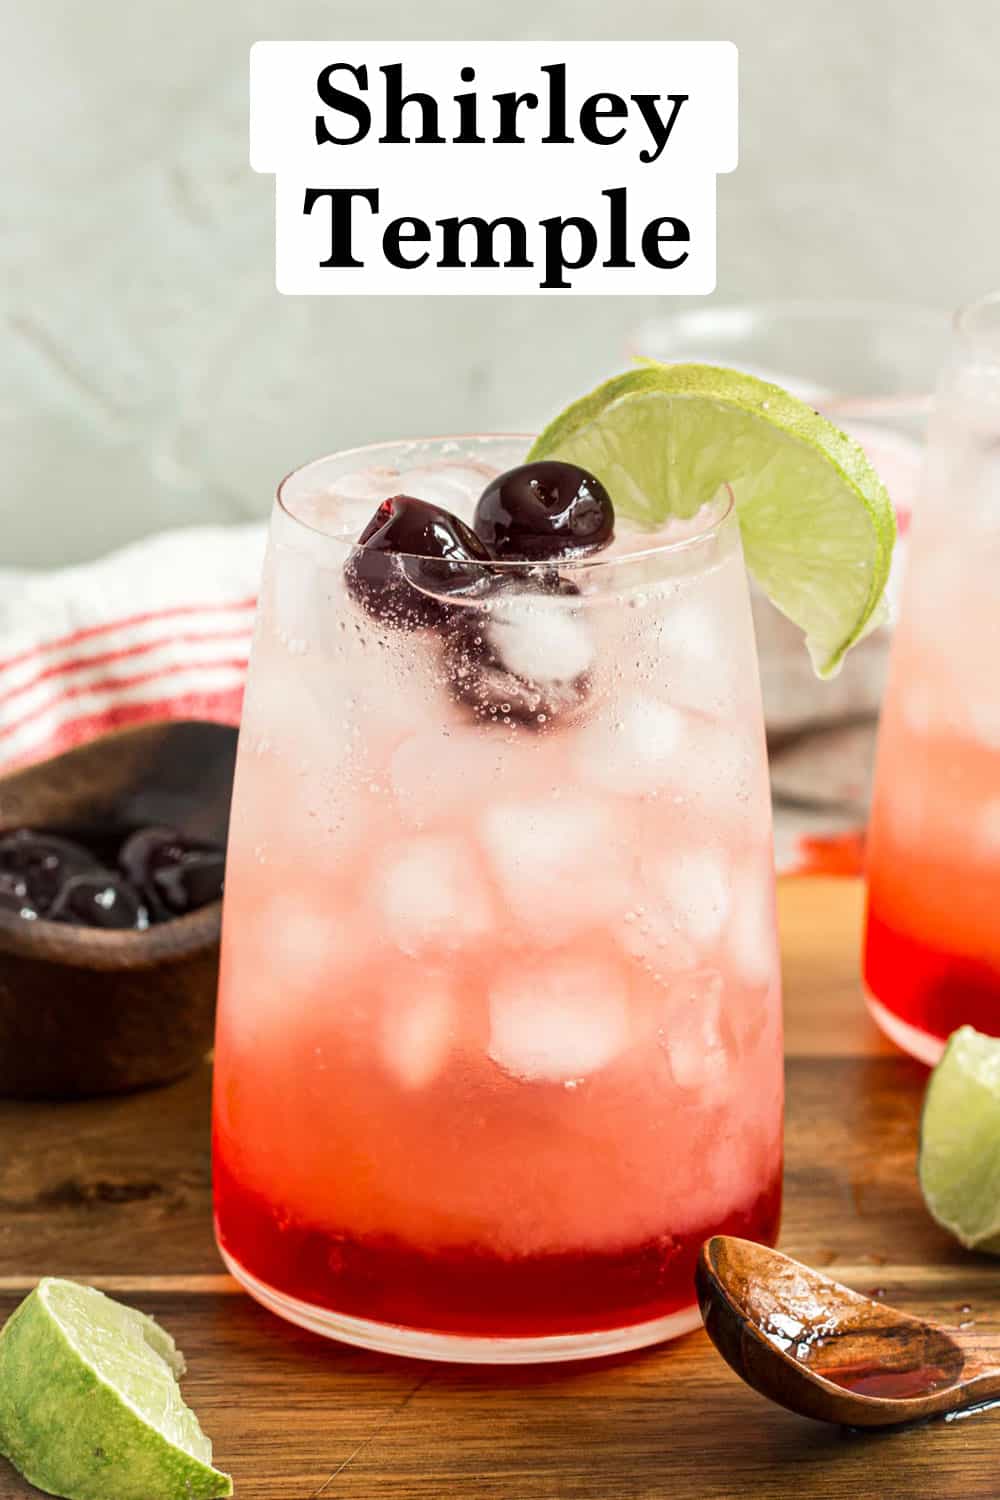 Shirley Temple drink topped with Maraschino cherries and a lime wedge.